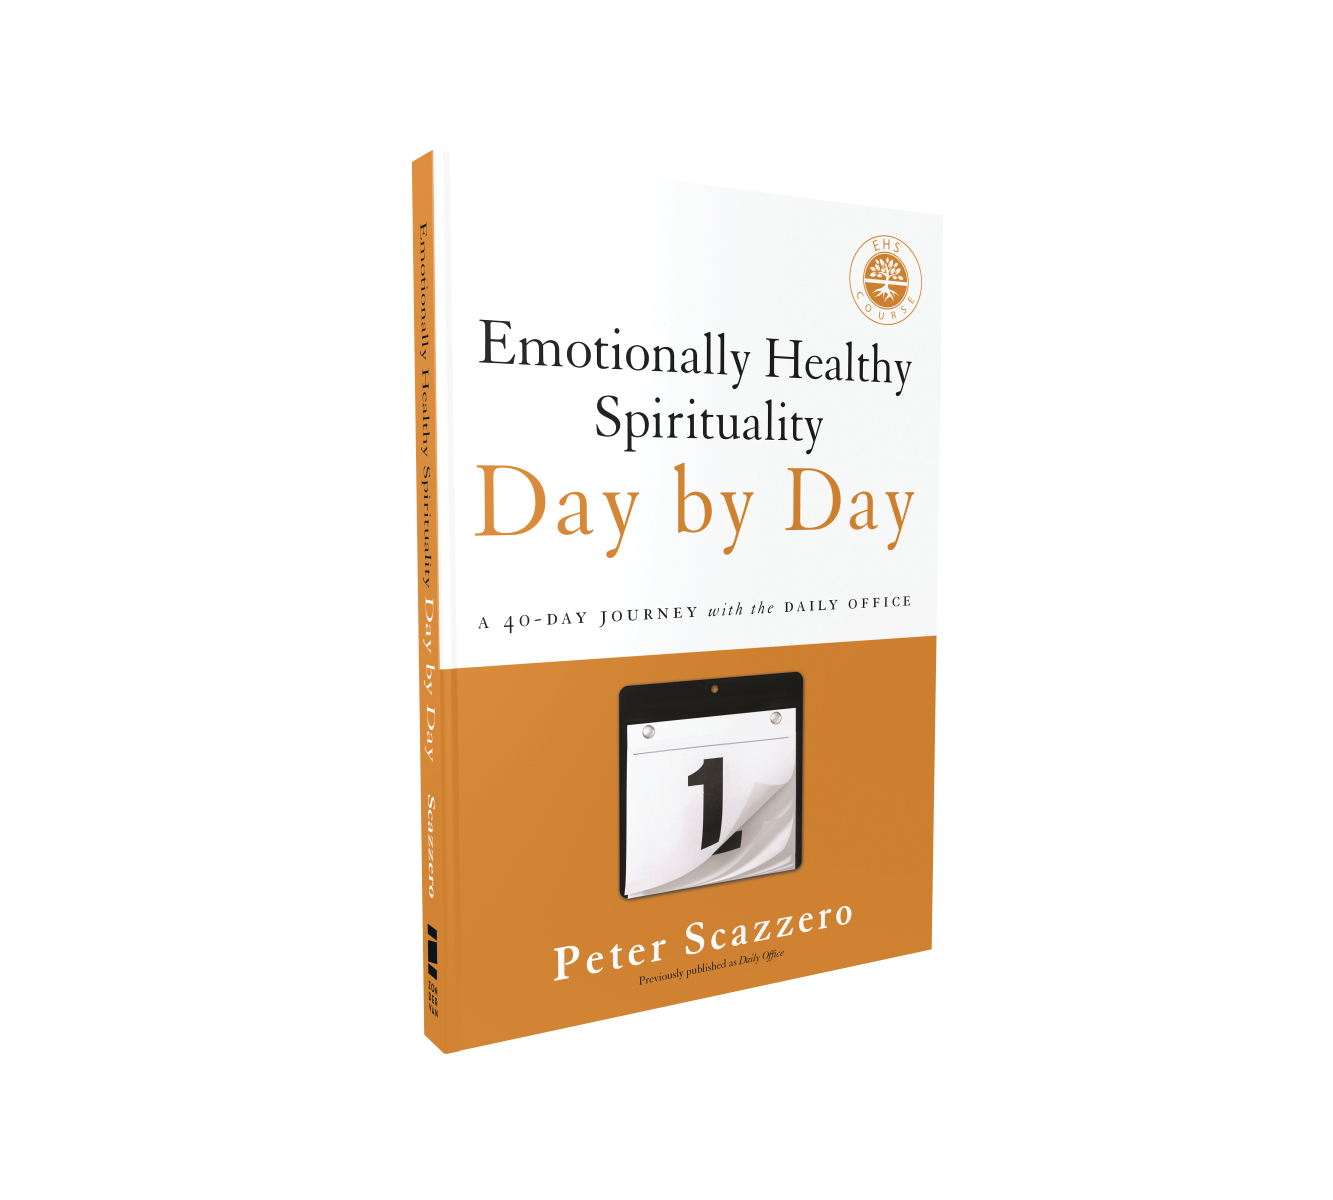 EH Spirituality Day by Day Devotional Product Image